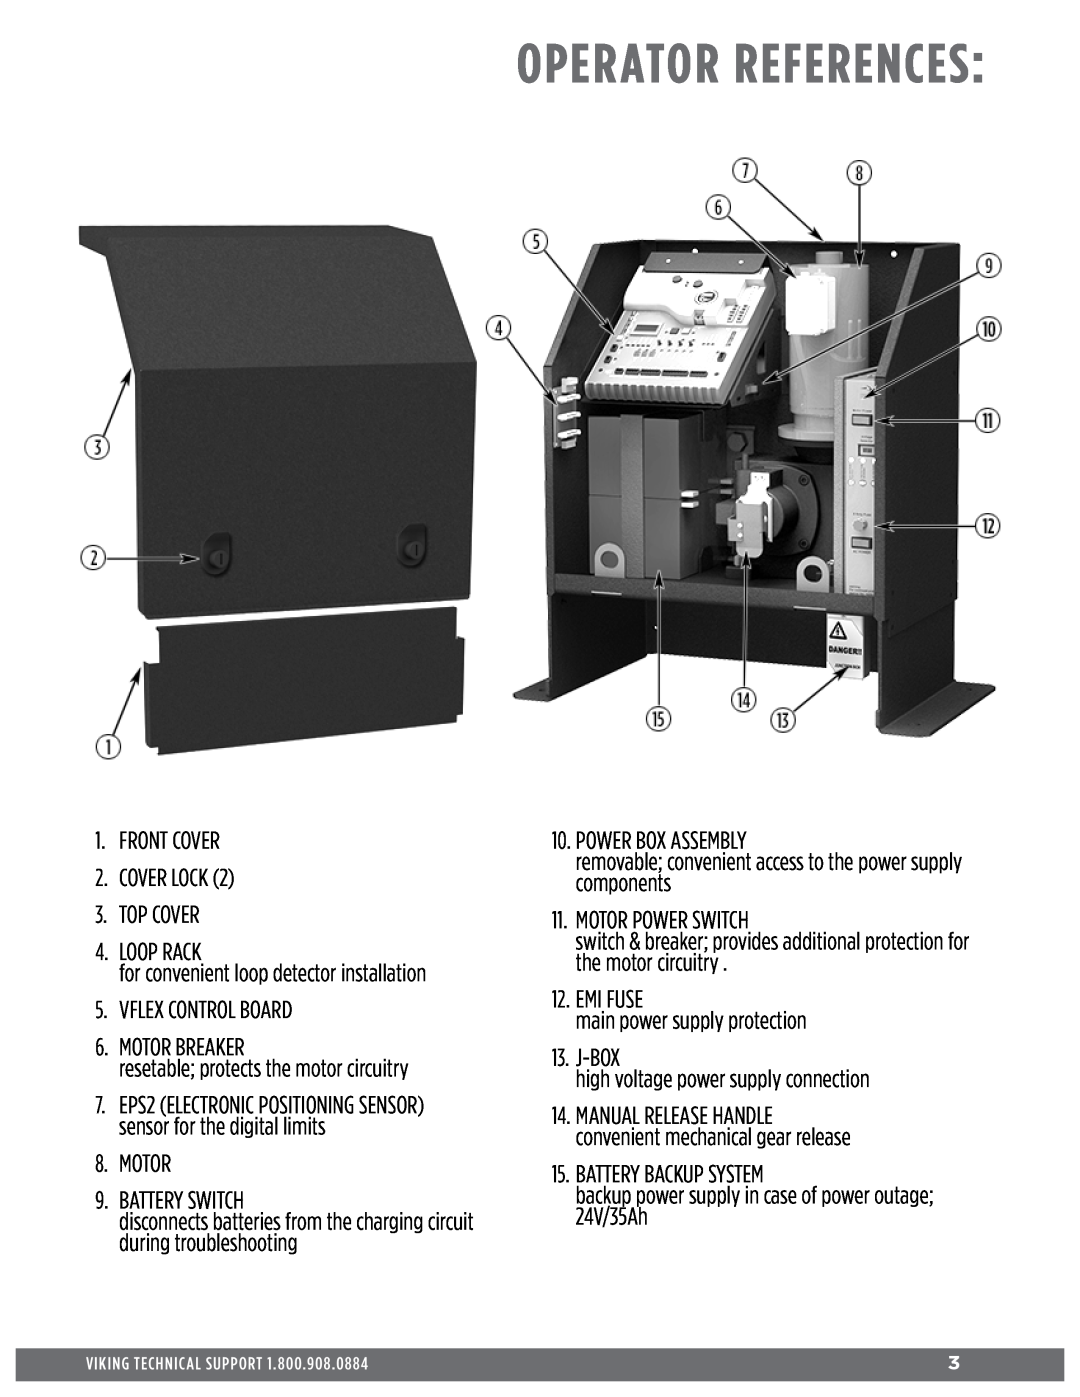 Viking Access Systems Q7 manual Operator References 